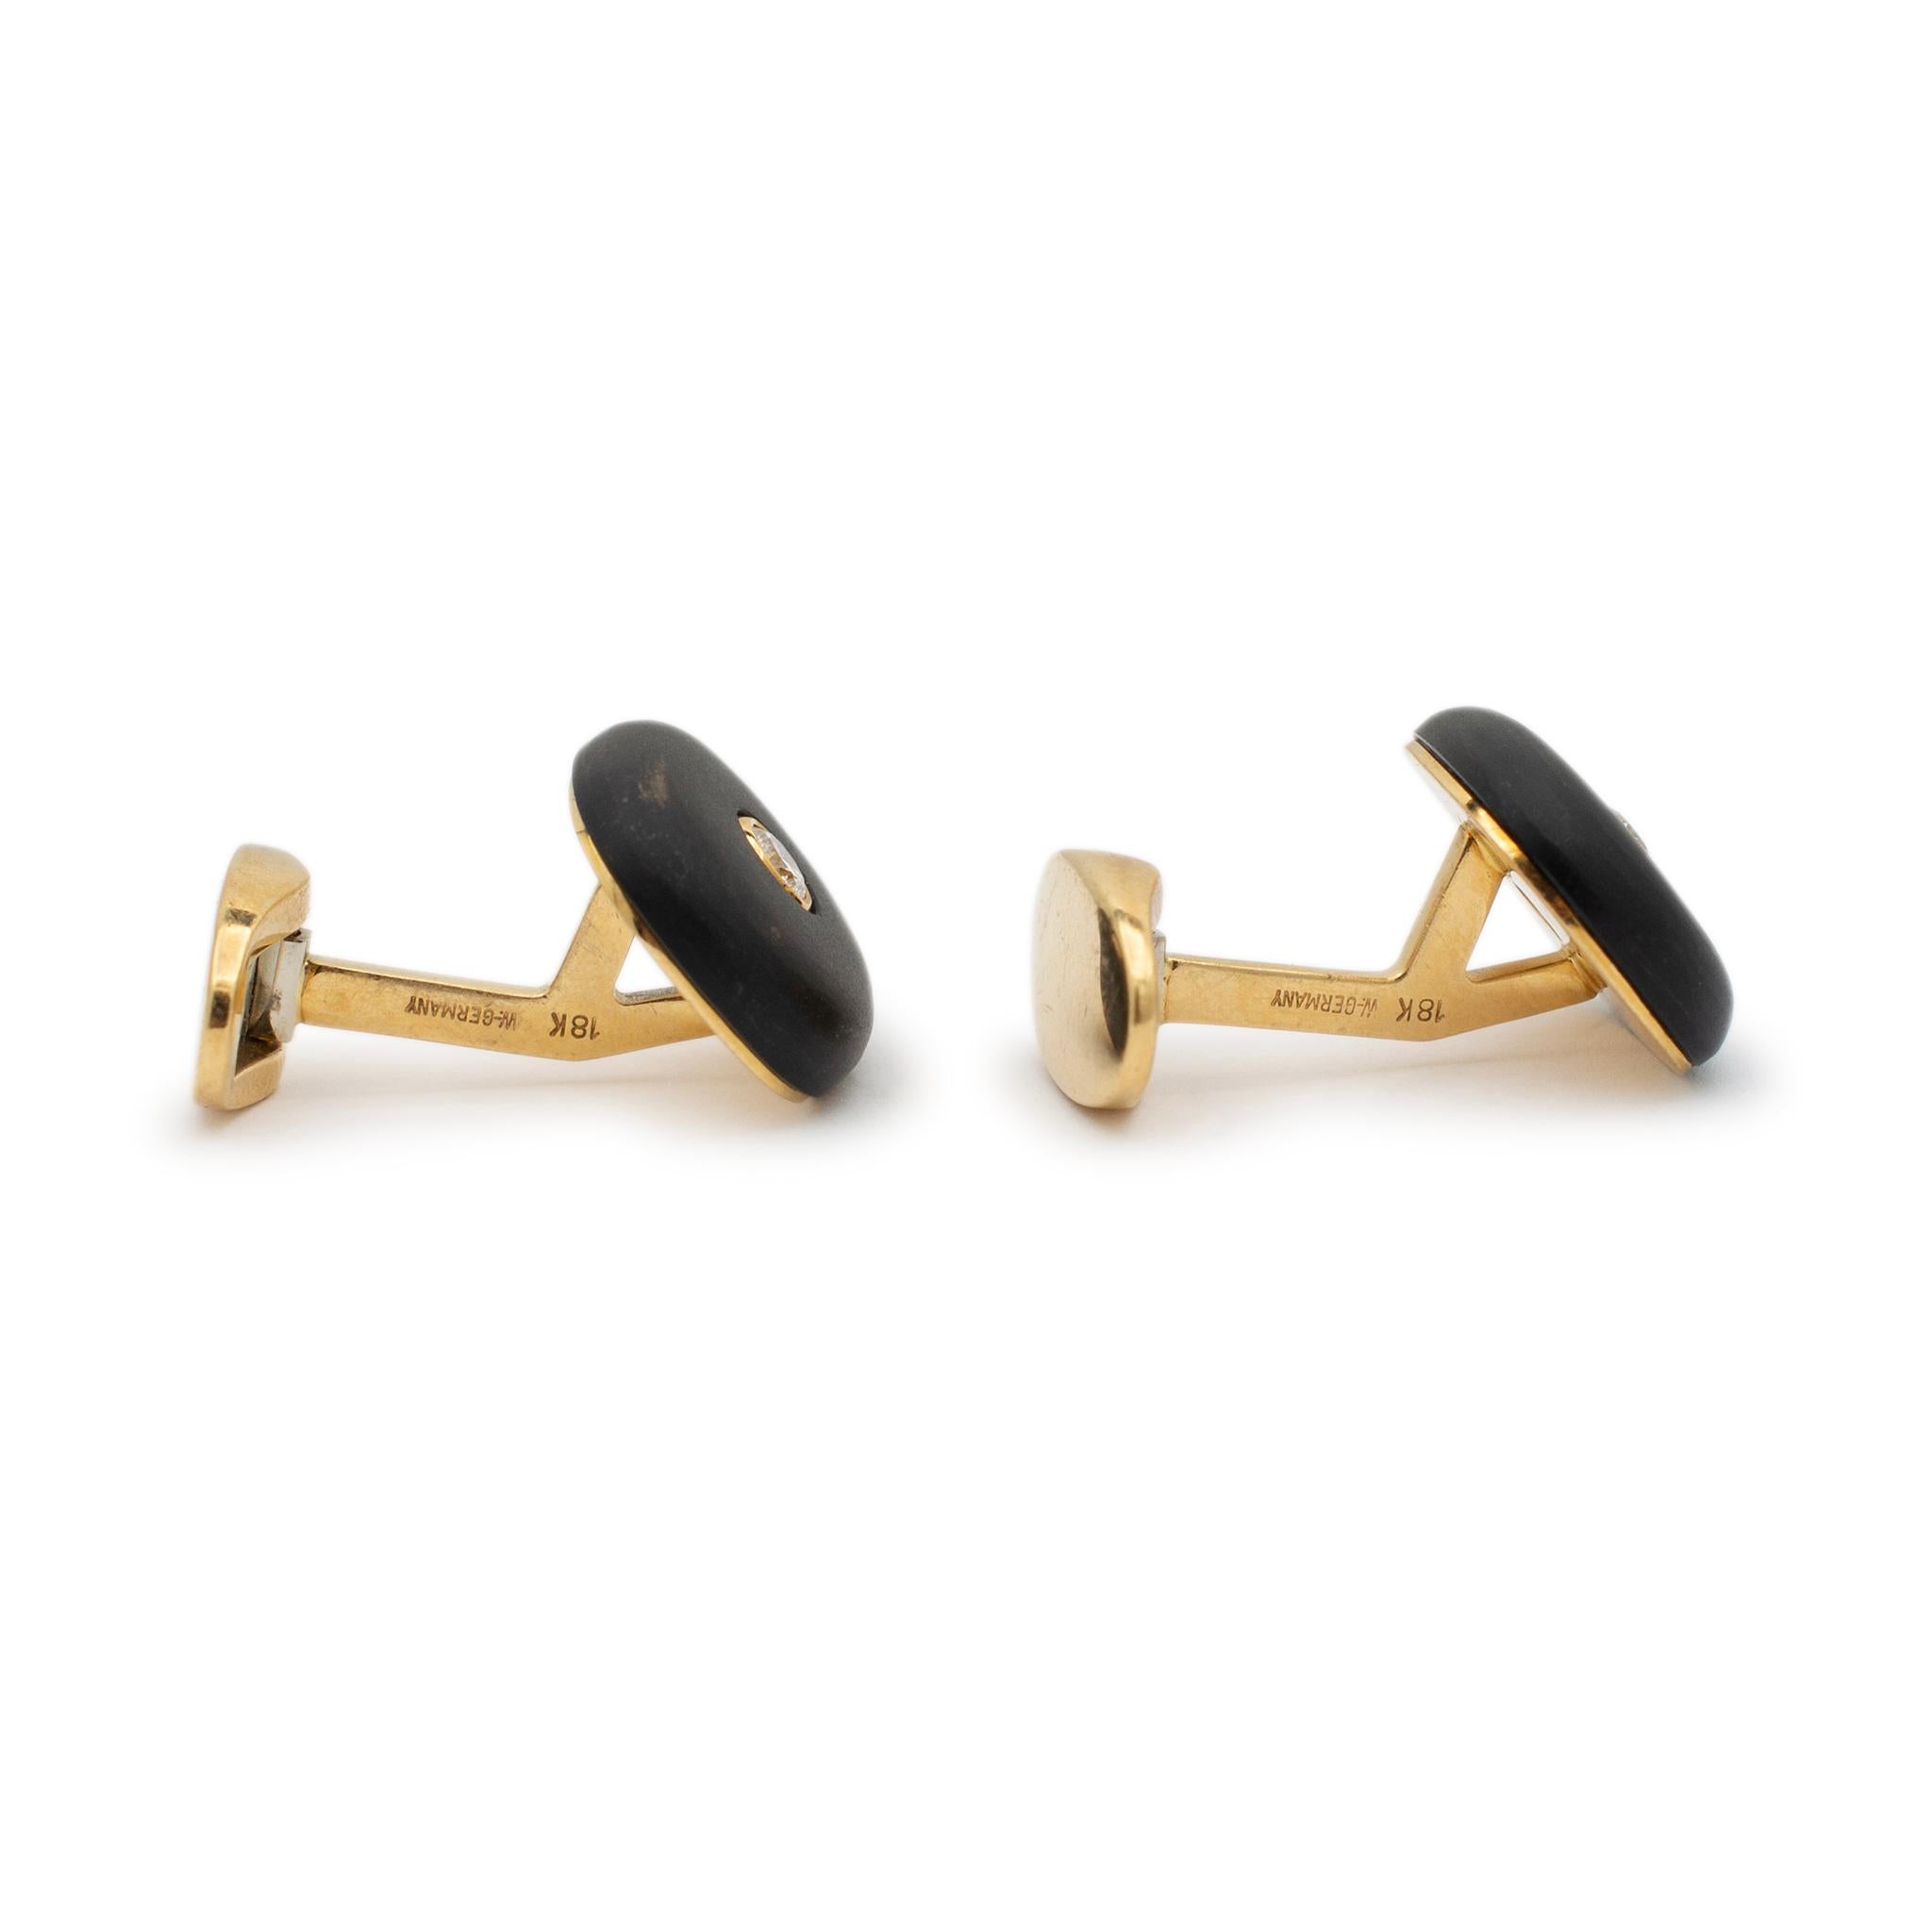 Metal Type: 18K Yellow Gold

Length: 0.75 inches

Width: 17.15 mm

Weight: 15.90 grams

18K yellow gold diamond cufflinks. Engraved with 